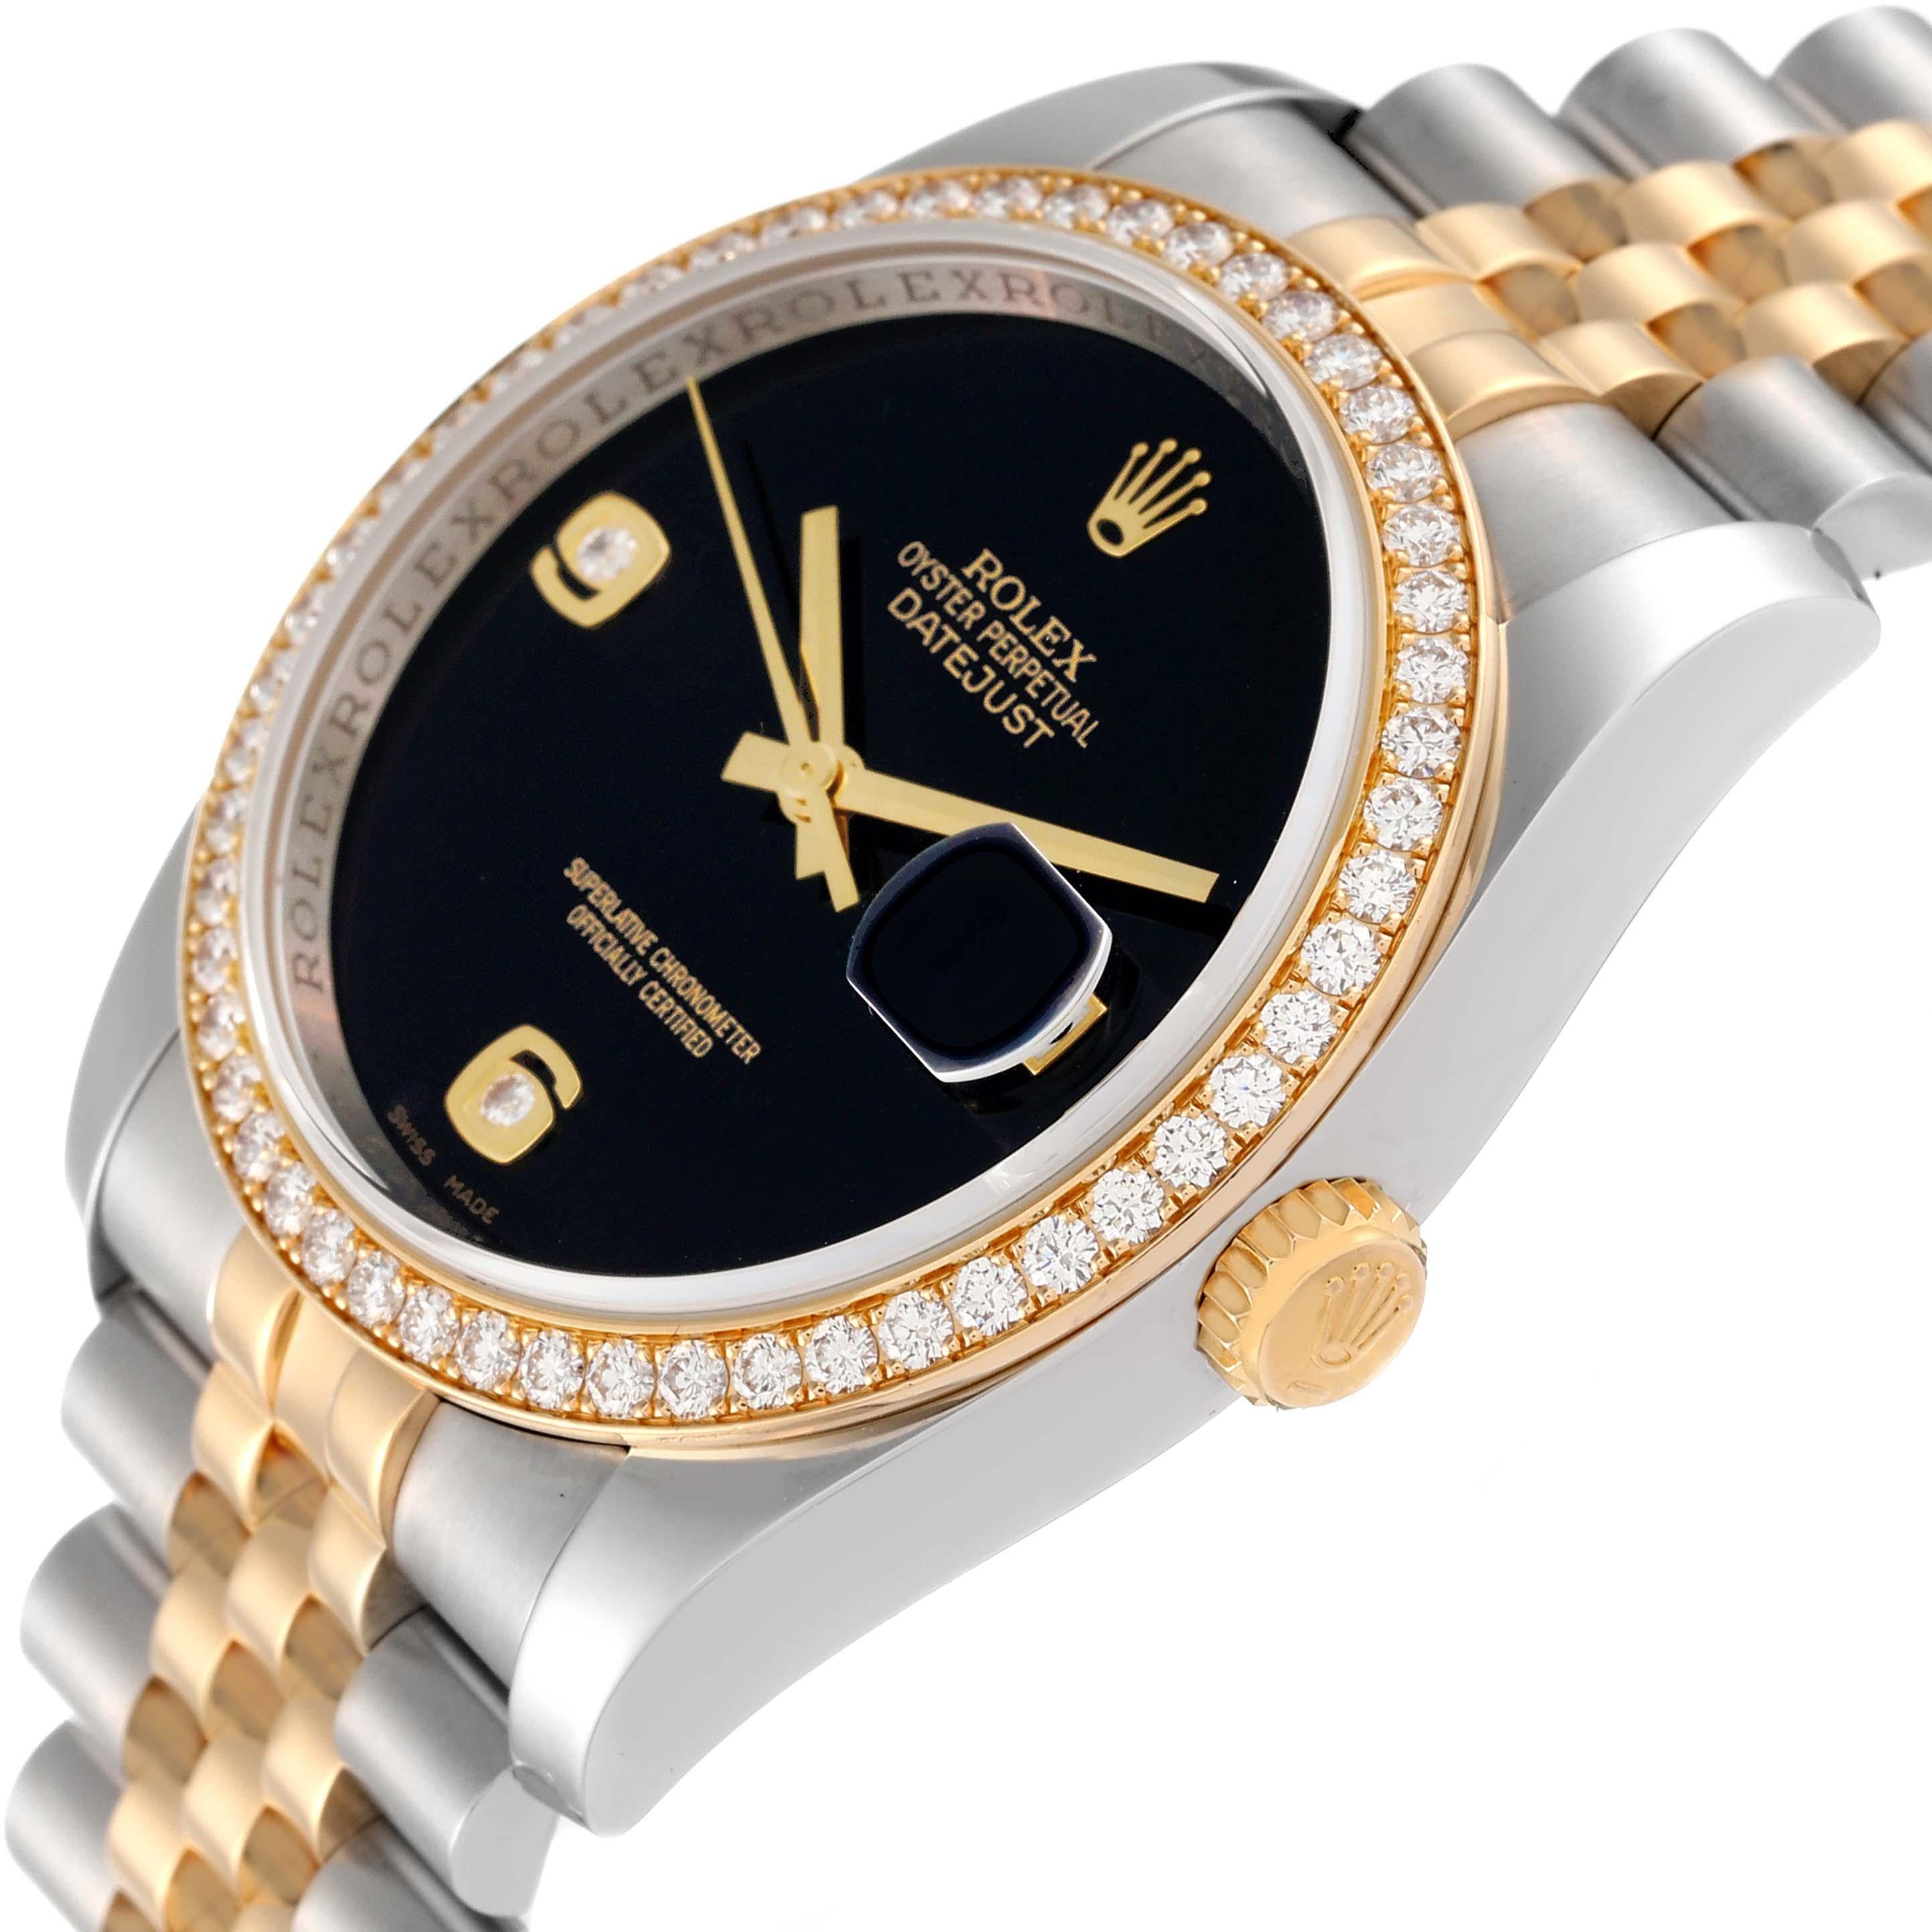 Rolex Datejust Black Dial Steel Yellow Gold Diamond Mens Watch 116243 In Excellent Condition For Sale In Atlanta, GA